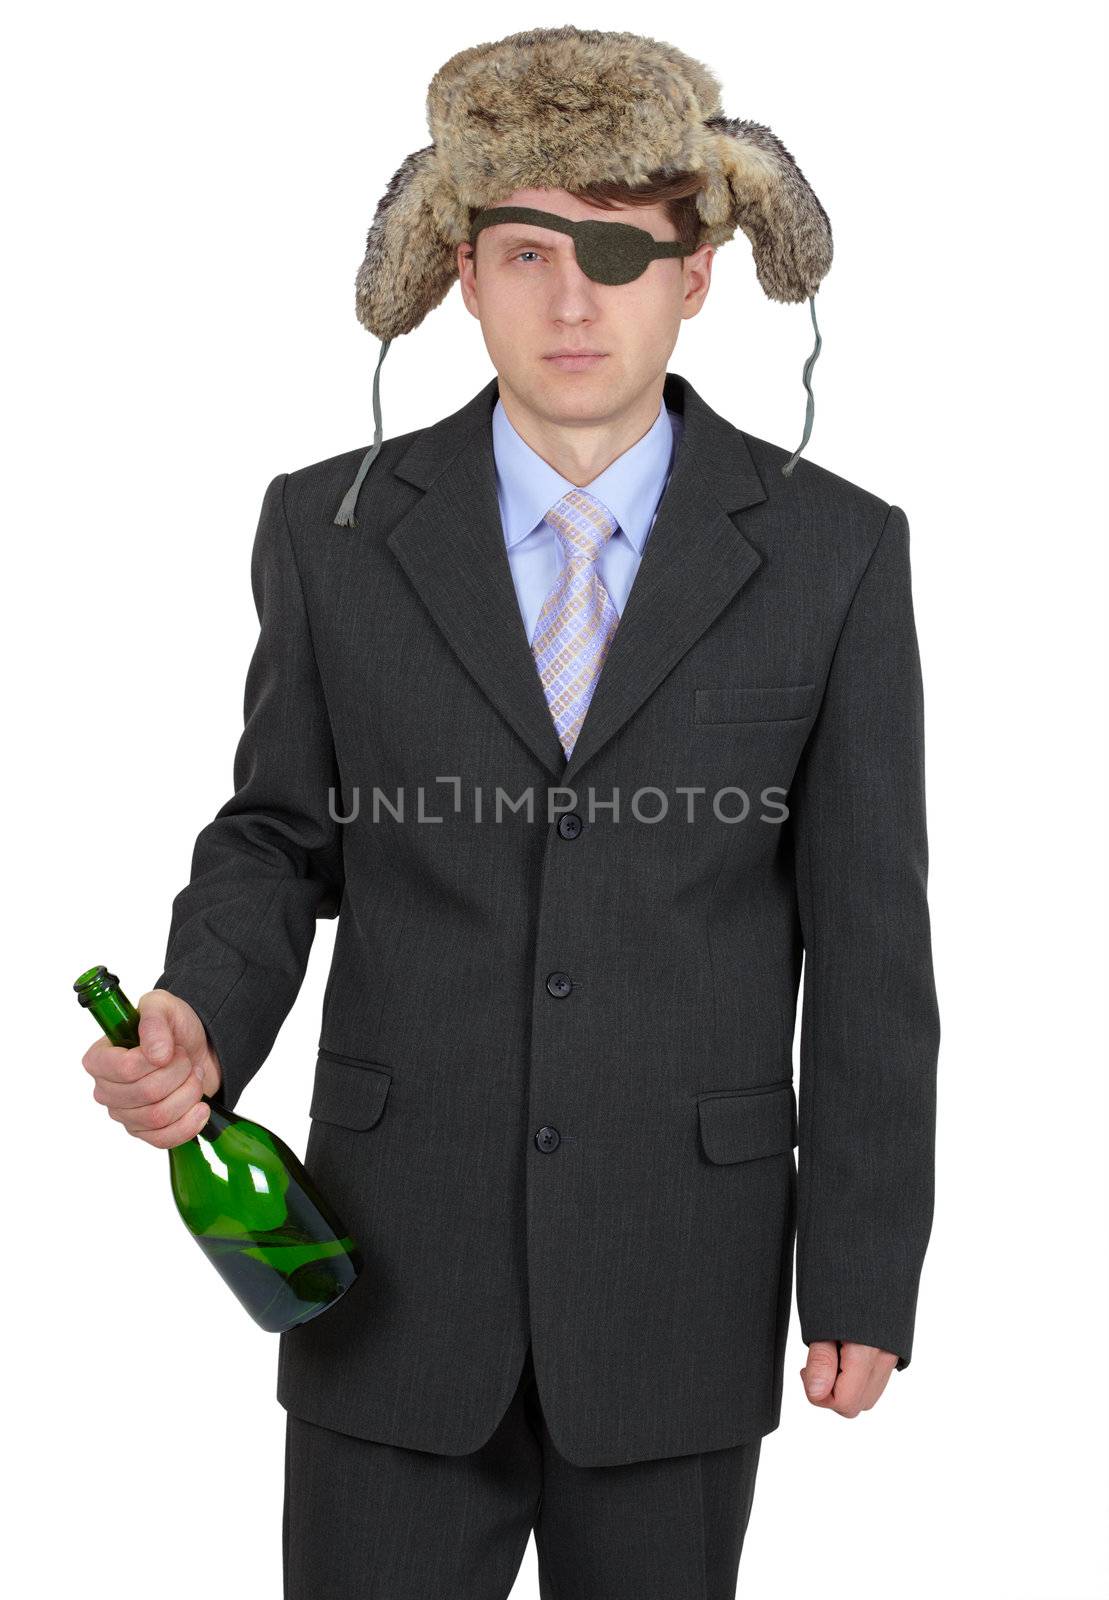 Funny drunk man in a fur hat with a bottle in his hand, stands on a white background